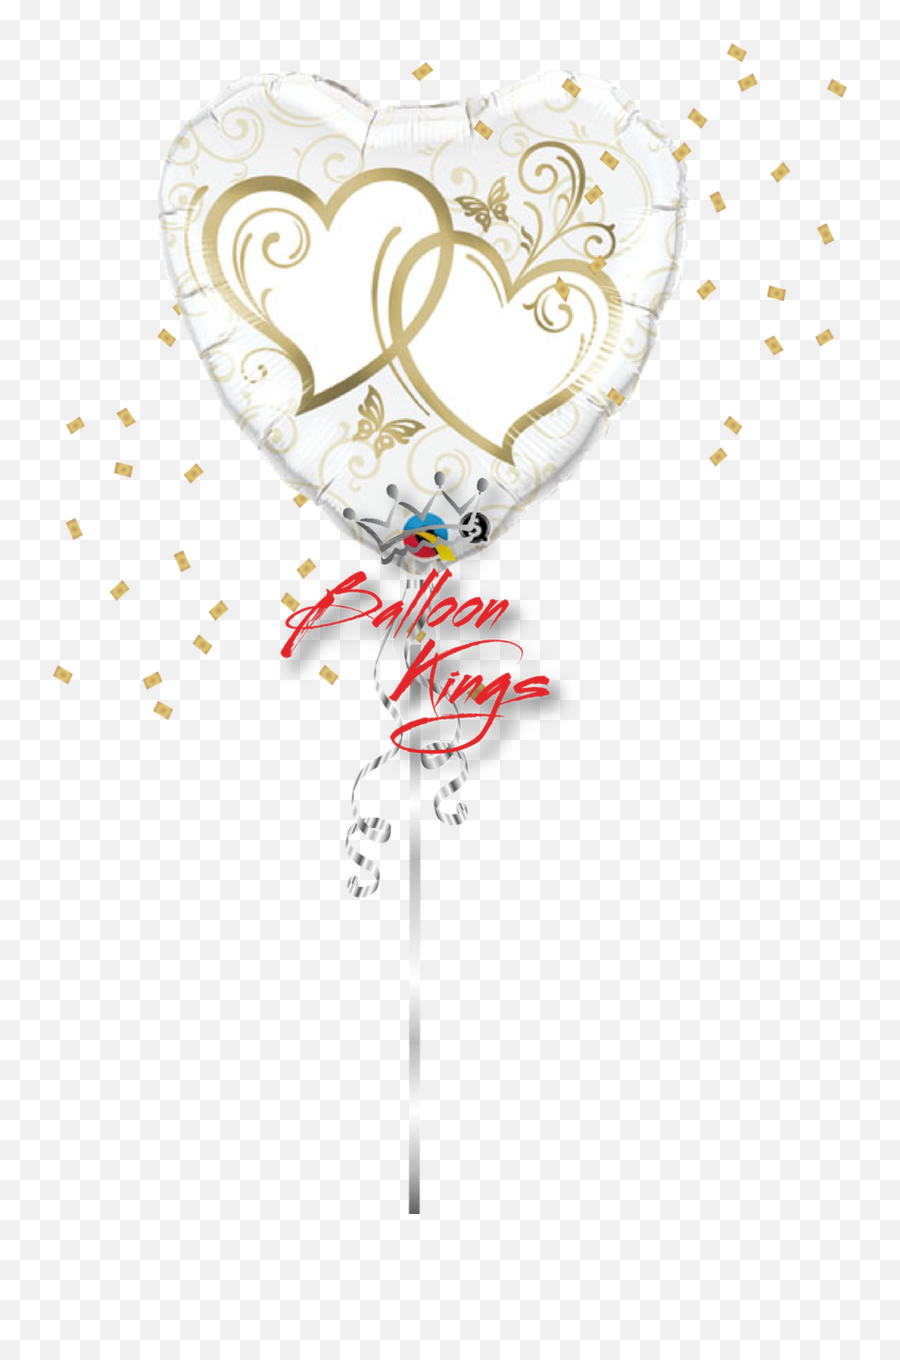 Entwined Gold Hearts - Corazon De Novios Png,Gold Hearts Png